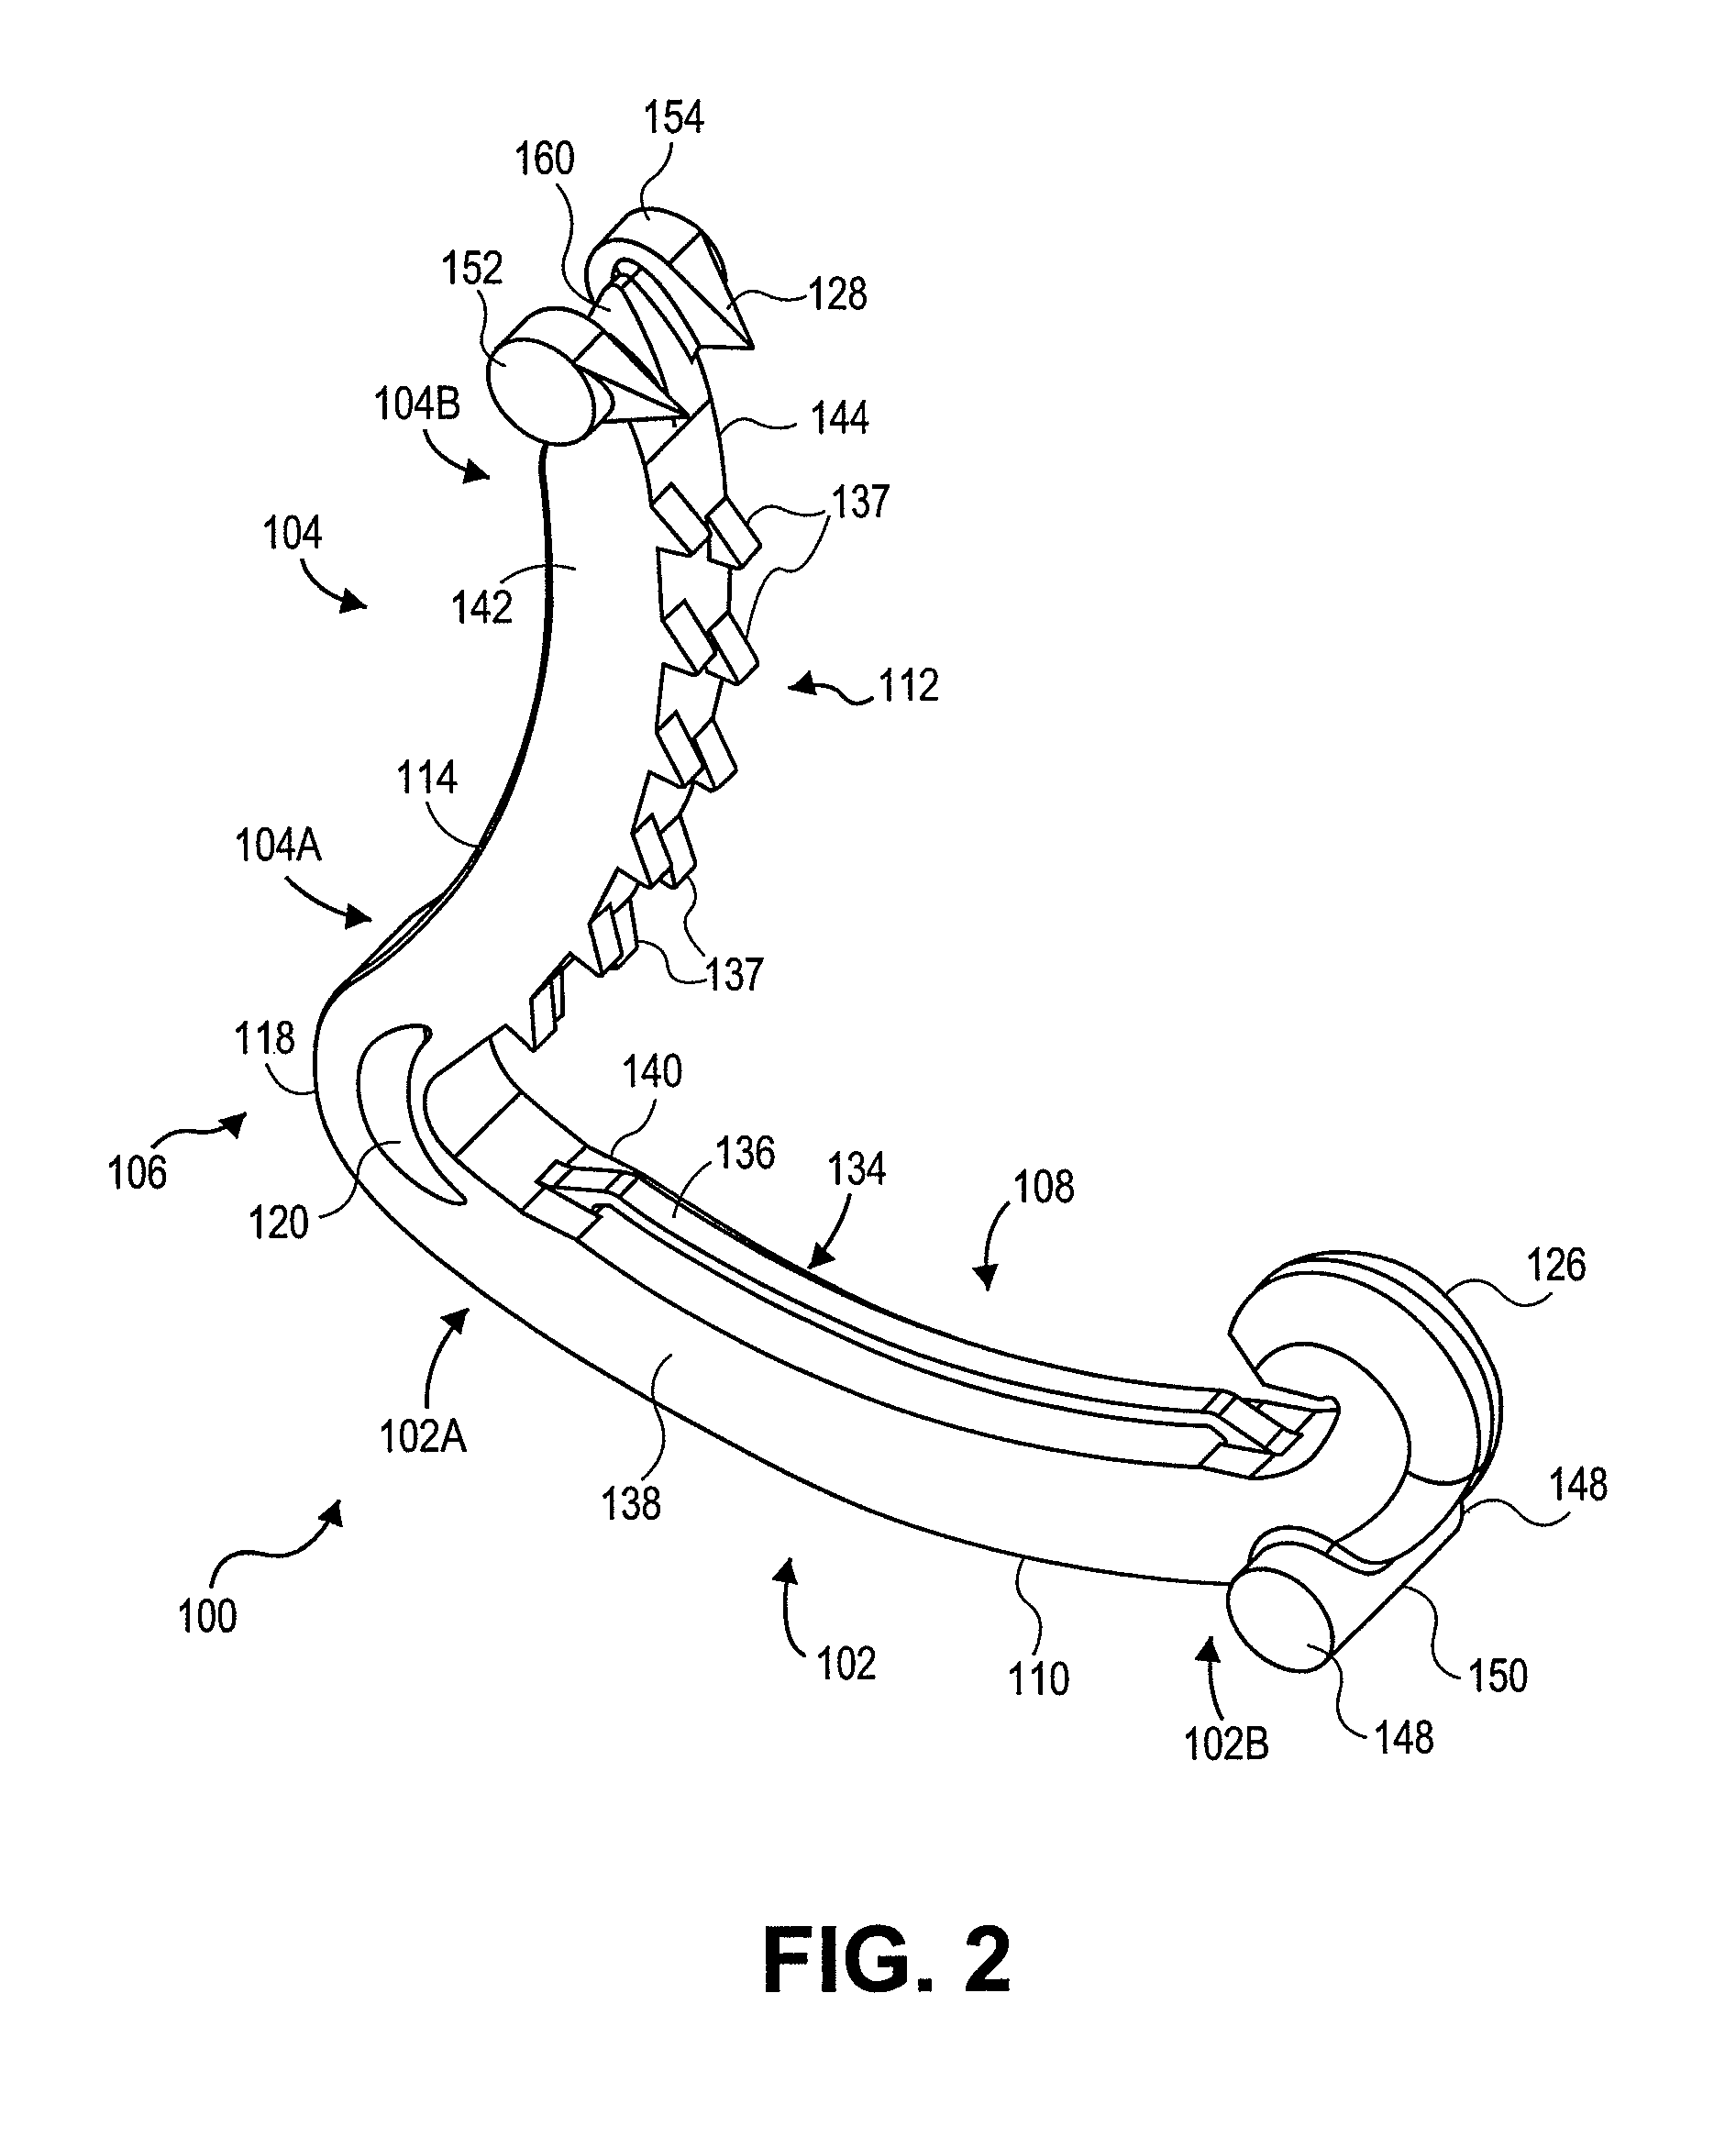 Ligation clip with flexible clamping feature